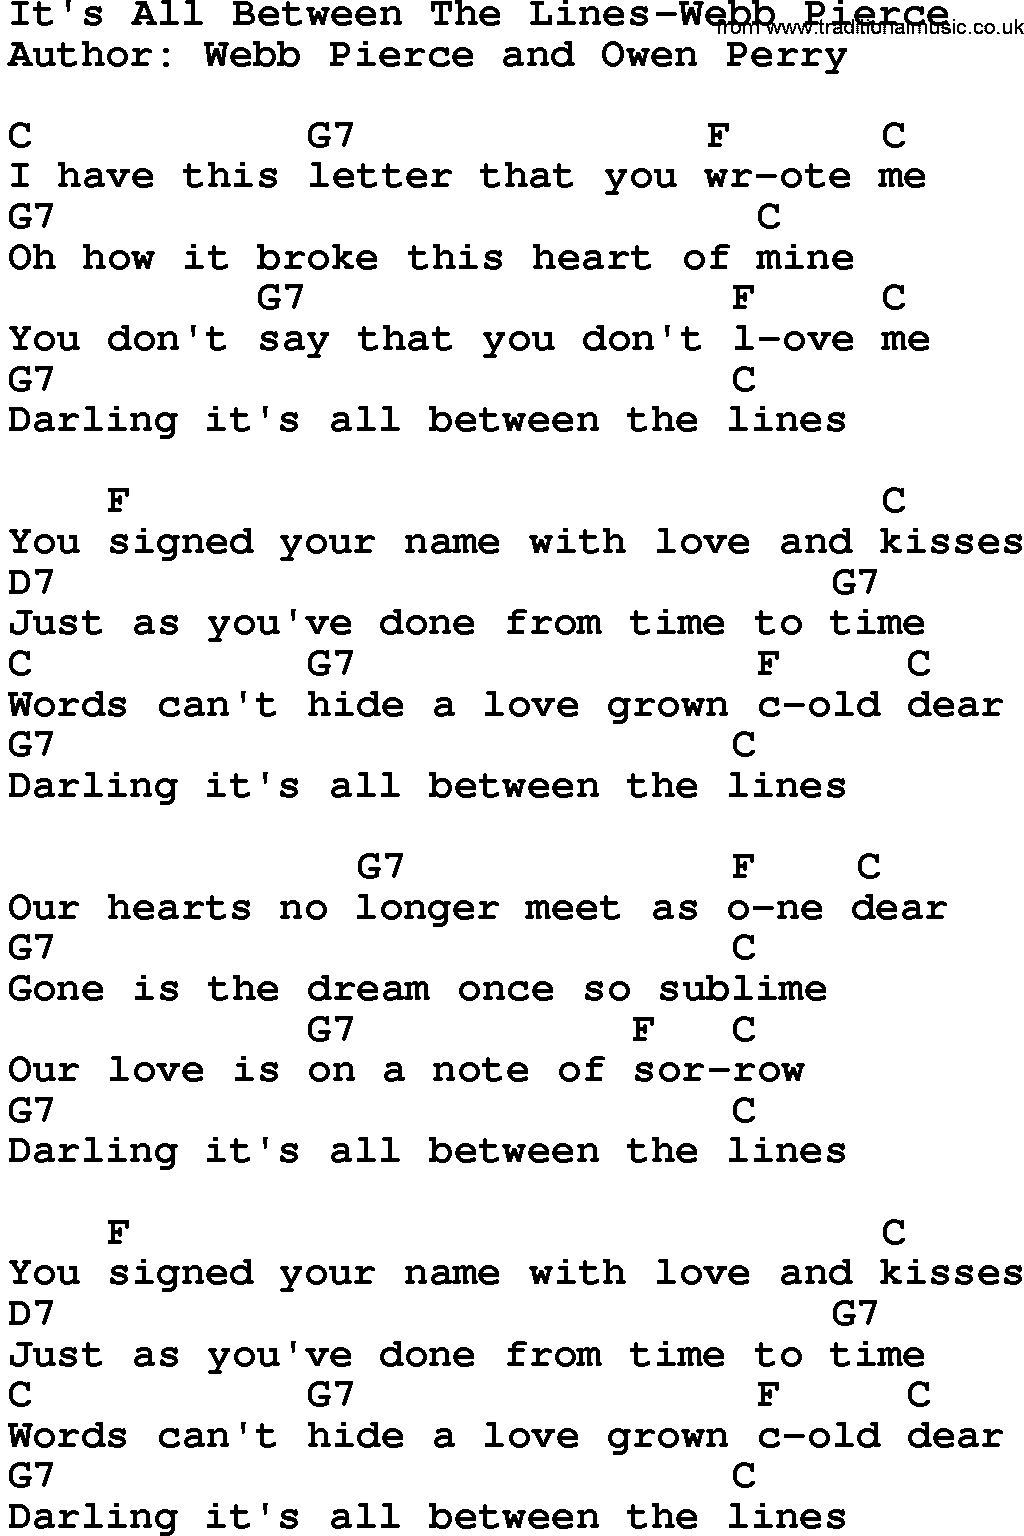 Country music song: It's All Between The Lines-Webb Pierce lyrics and chords